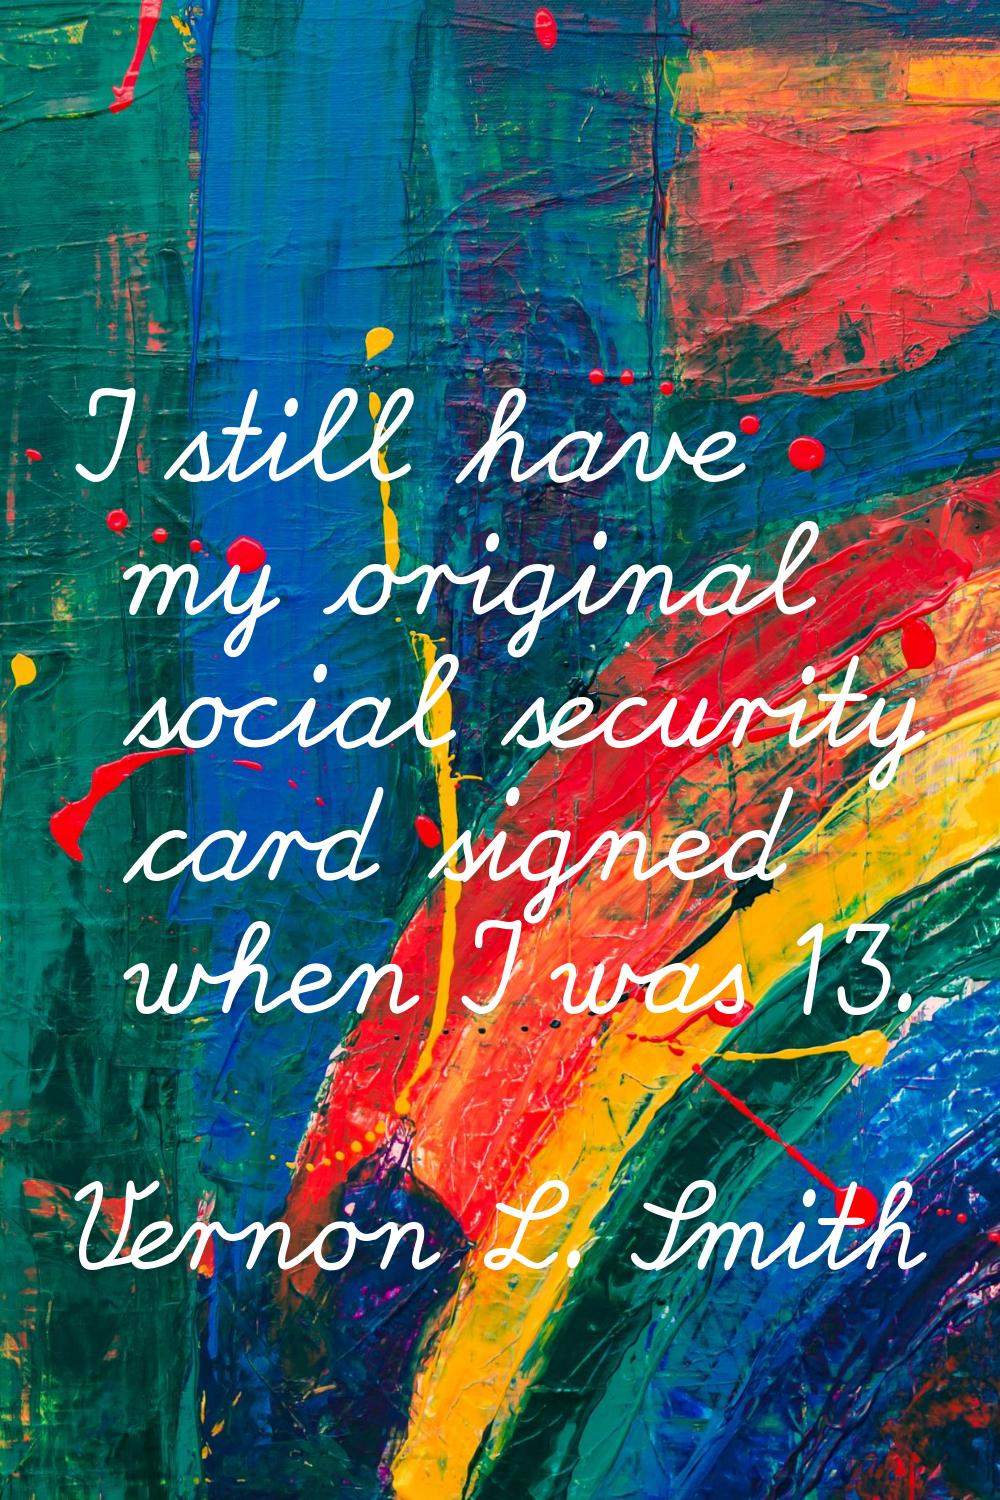 I still have my original social security card signed when I was 13.